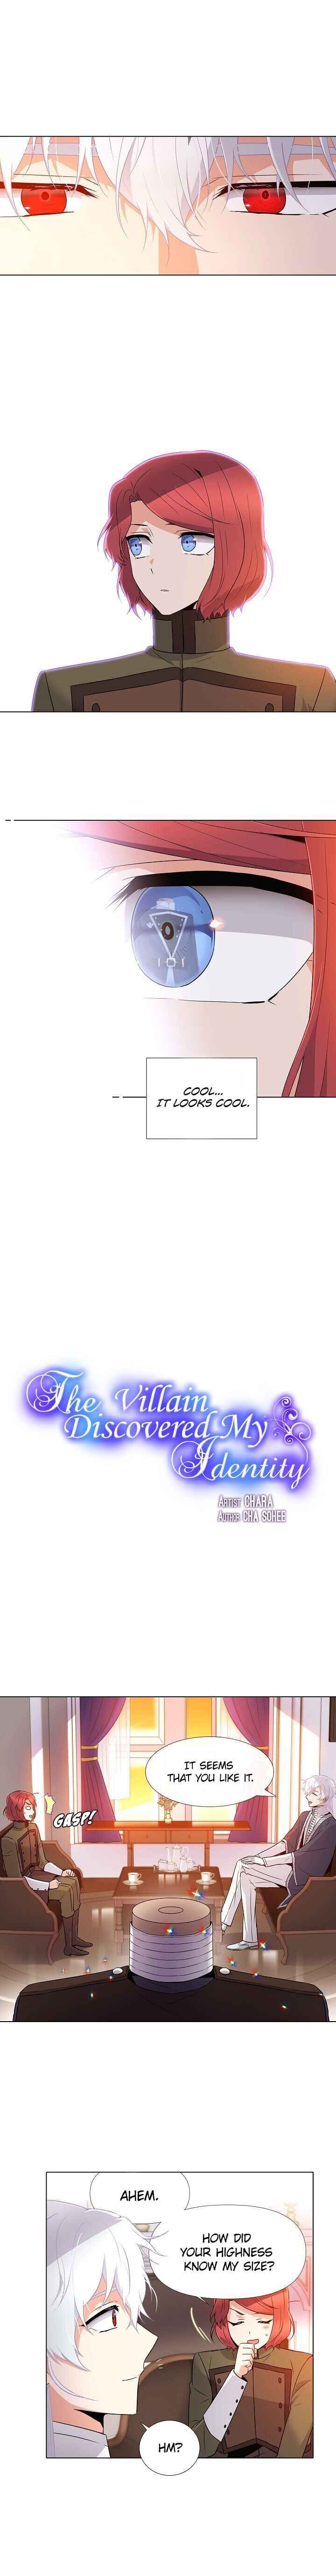 The Villain Discovered My Identity Chapter 015 page 4